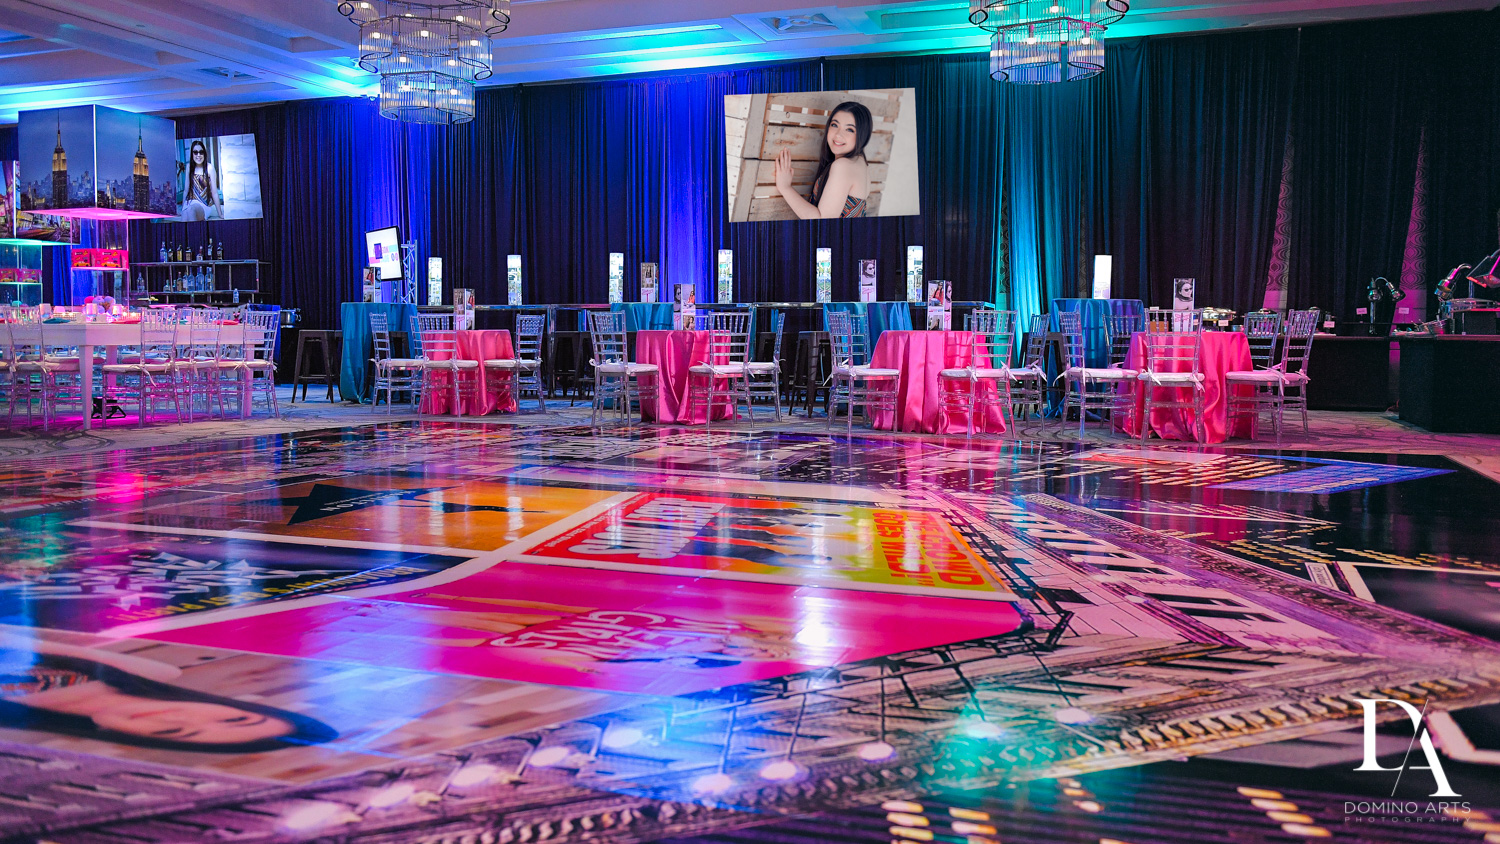 Best party decor at New York Theme Bat Mitzvah at Woodfield Country Club, Boca Raton by Domino Arts Photography